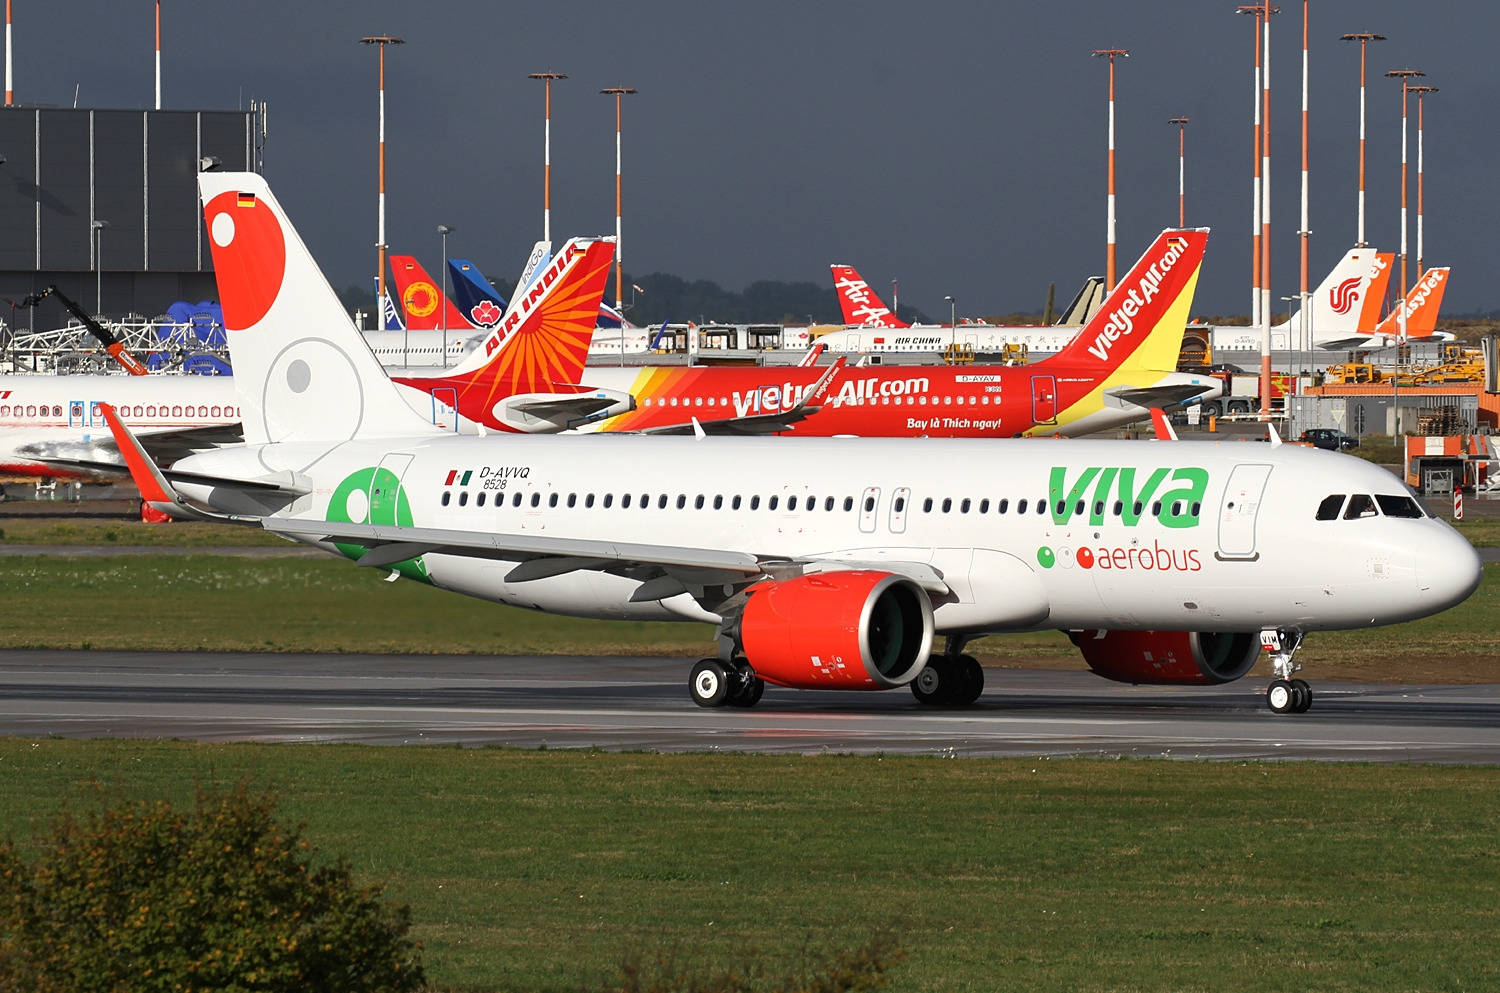 Viva Aerobus Among Other Airplanes At Airport Wallpaper